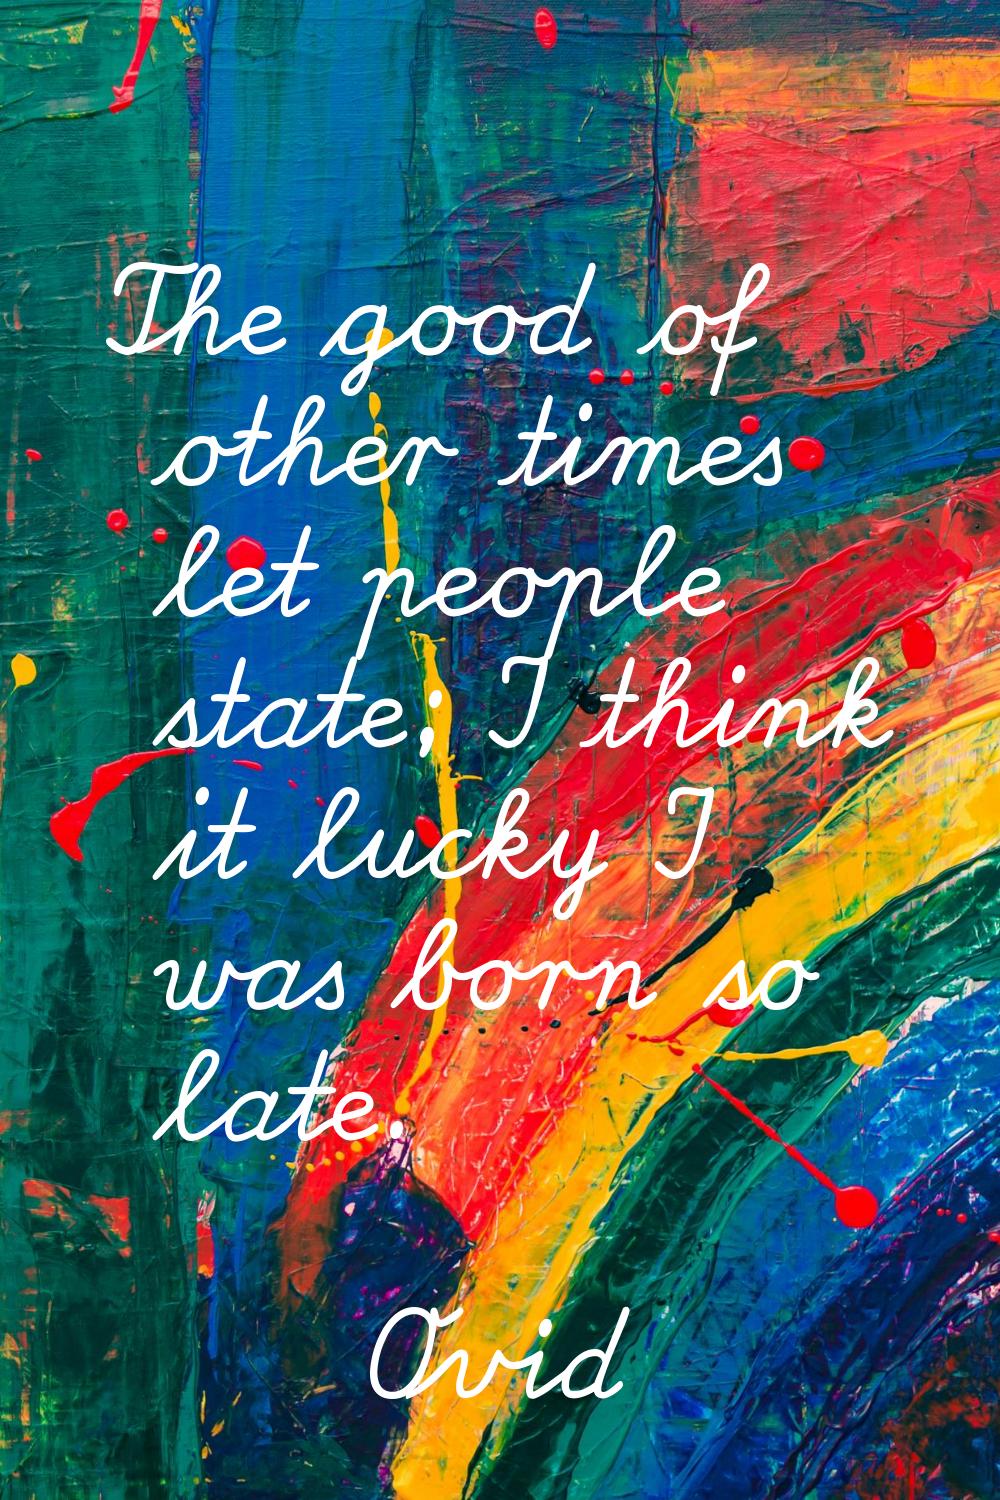 The good of other times let people state; I think it lucky I was born so late.